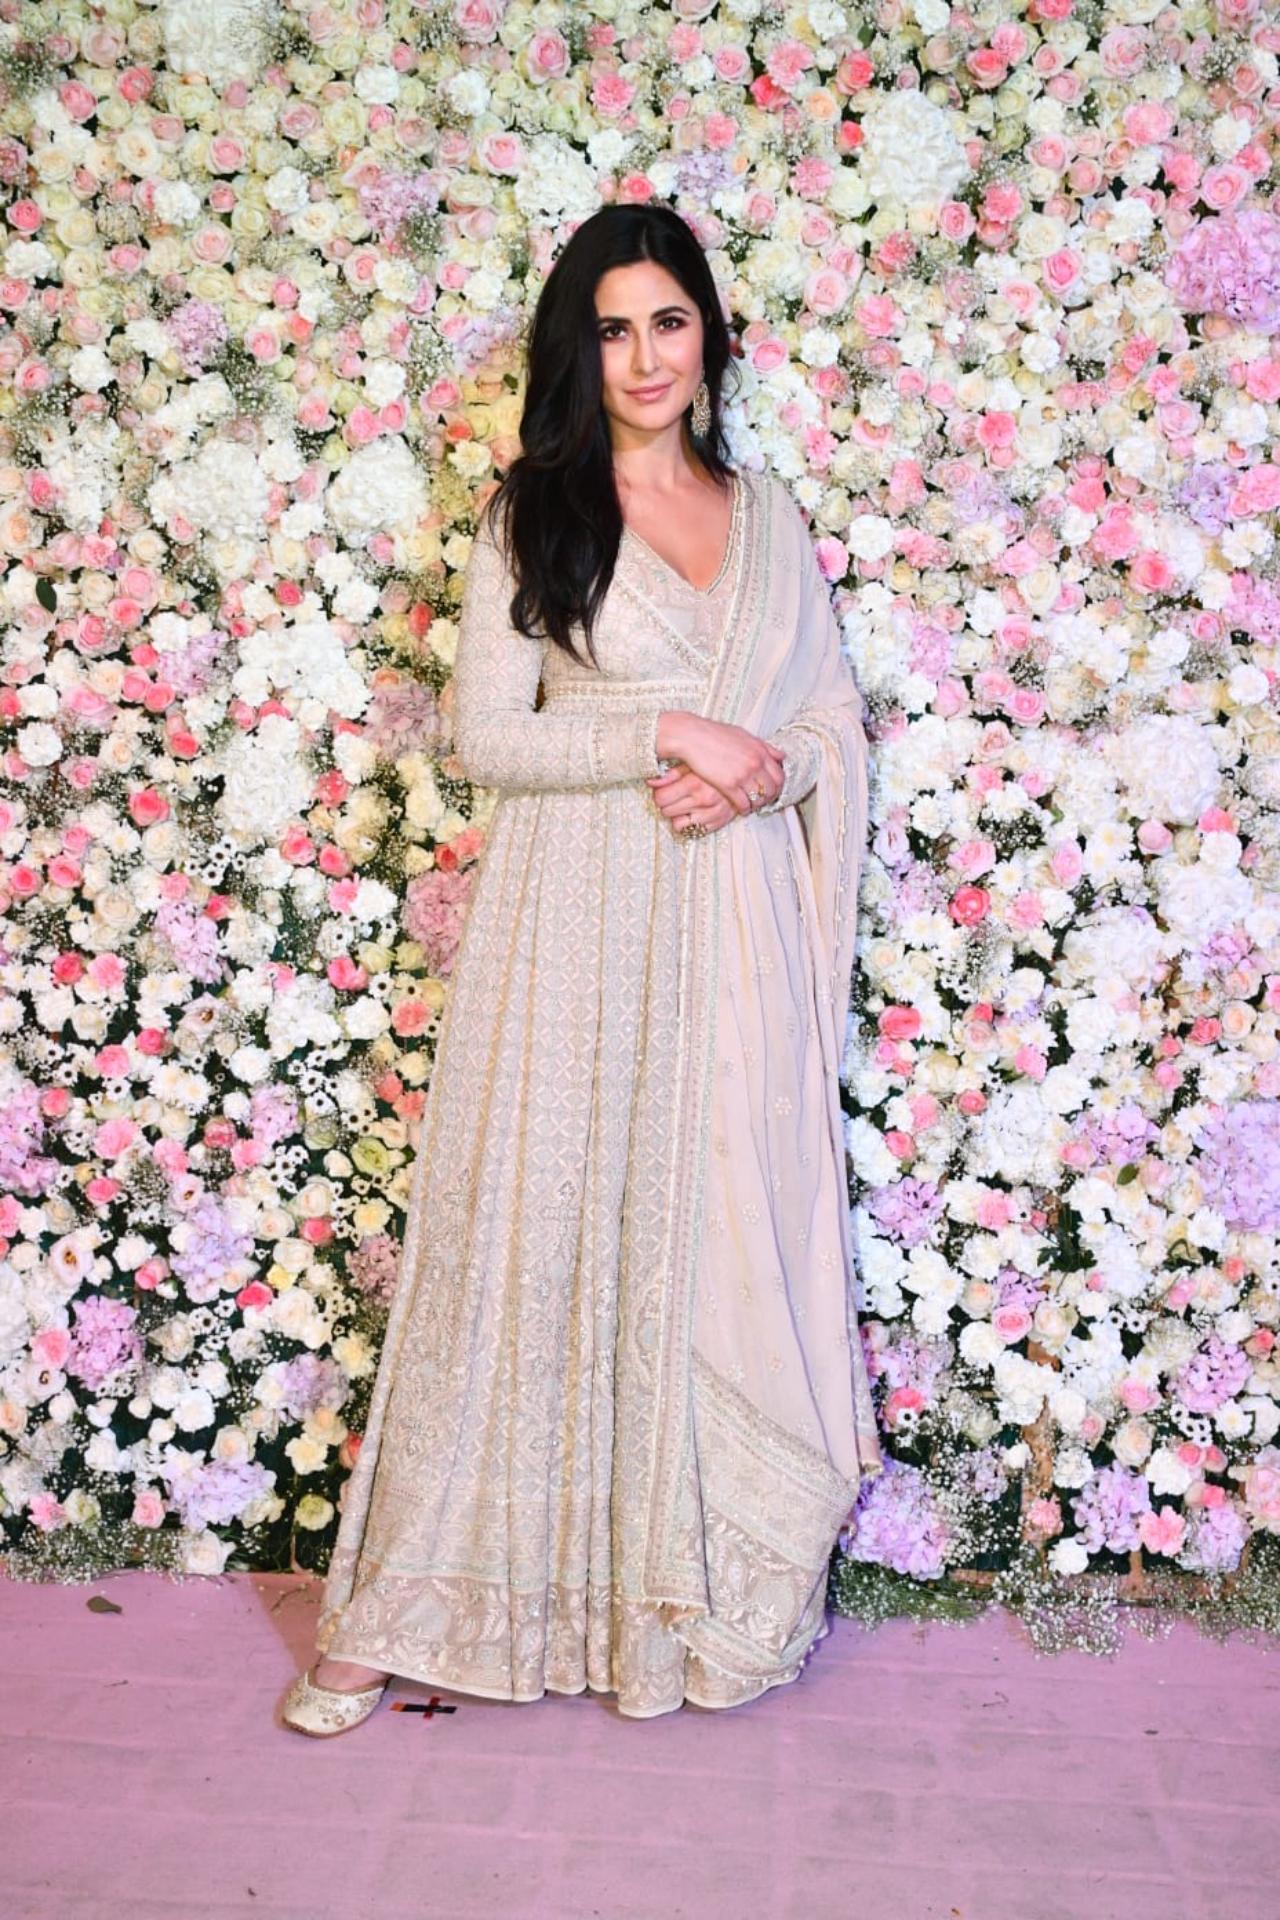 Katrina Kaif glowed in an ivory white anarkali outfit. She is close friends with Arpita Khan and is a regular at the parties hosted by the couple